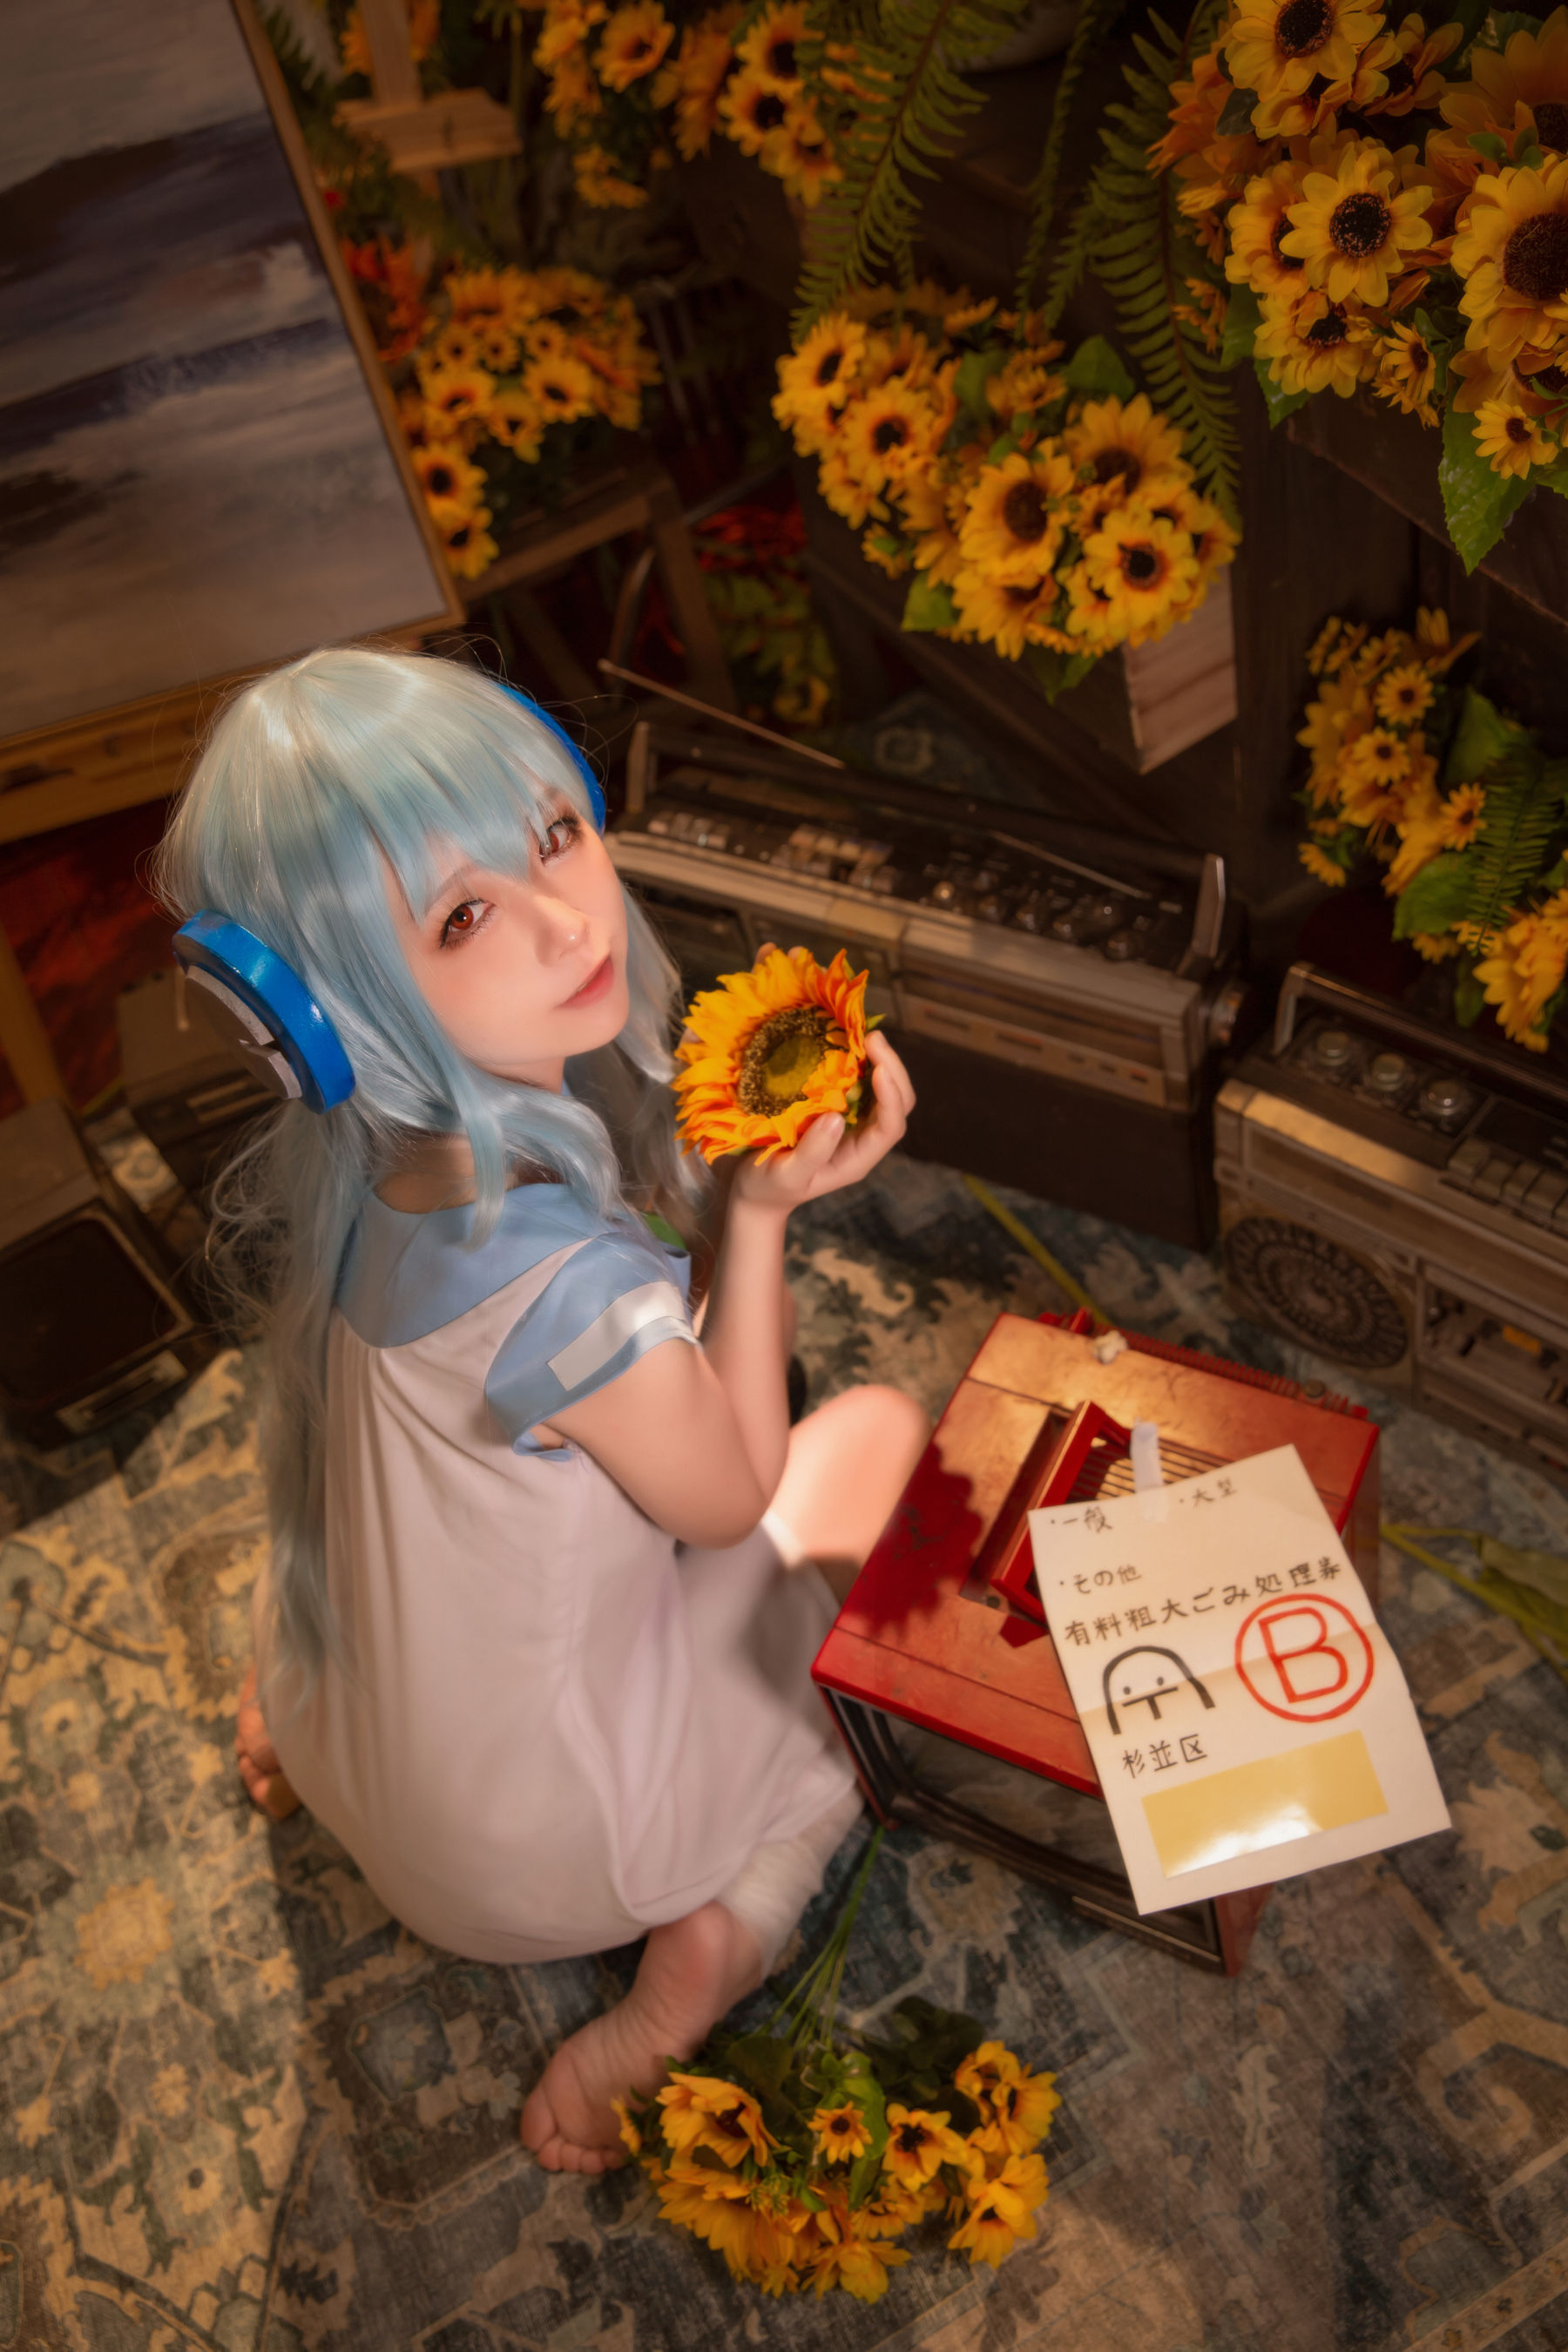 [Net Red COSER Photo] Anime blogger G44 will not be hurt - Music Box Page 8 No.54e1ad